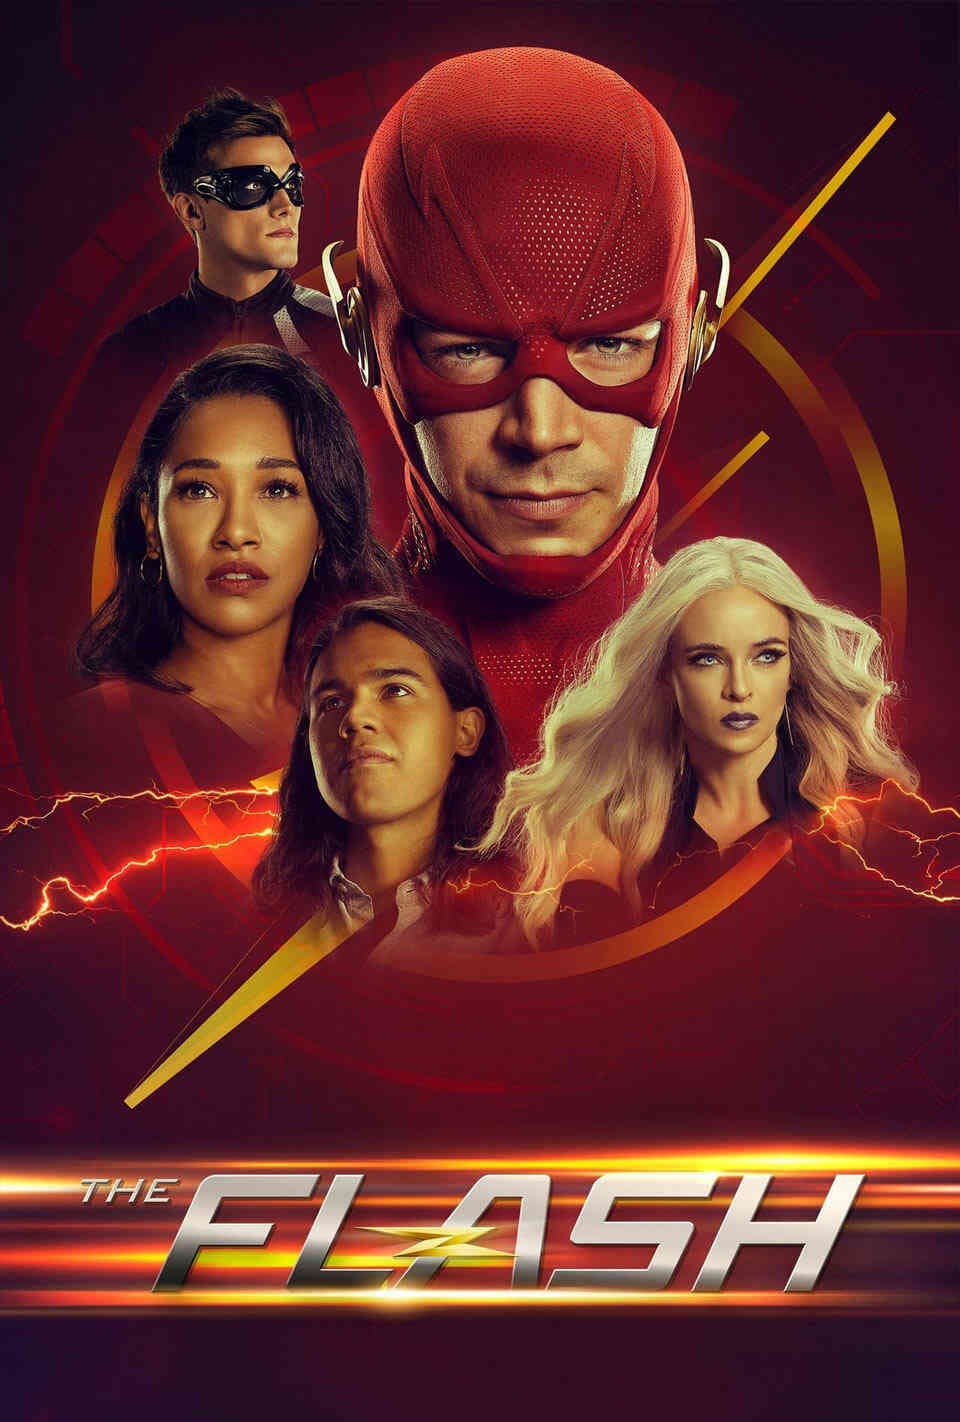 Read The Flash screenplay (poster)